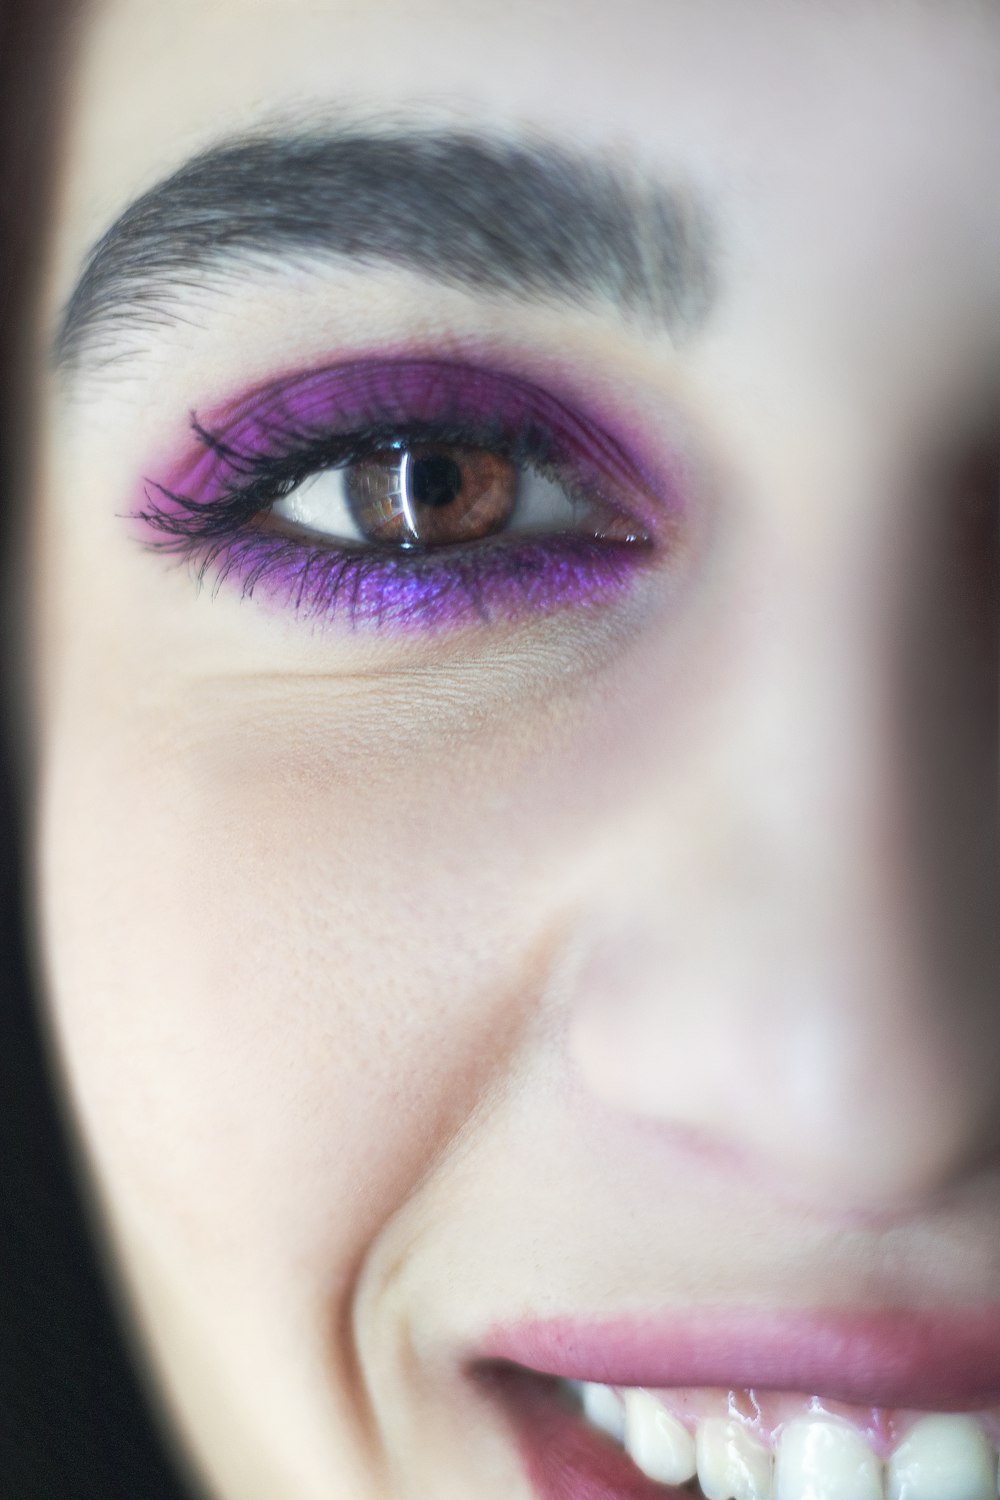 a close up of a woman's face with purple eye makeup